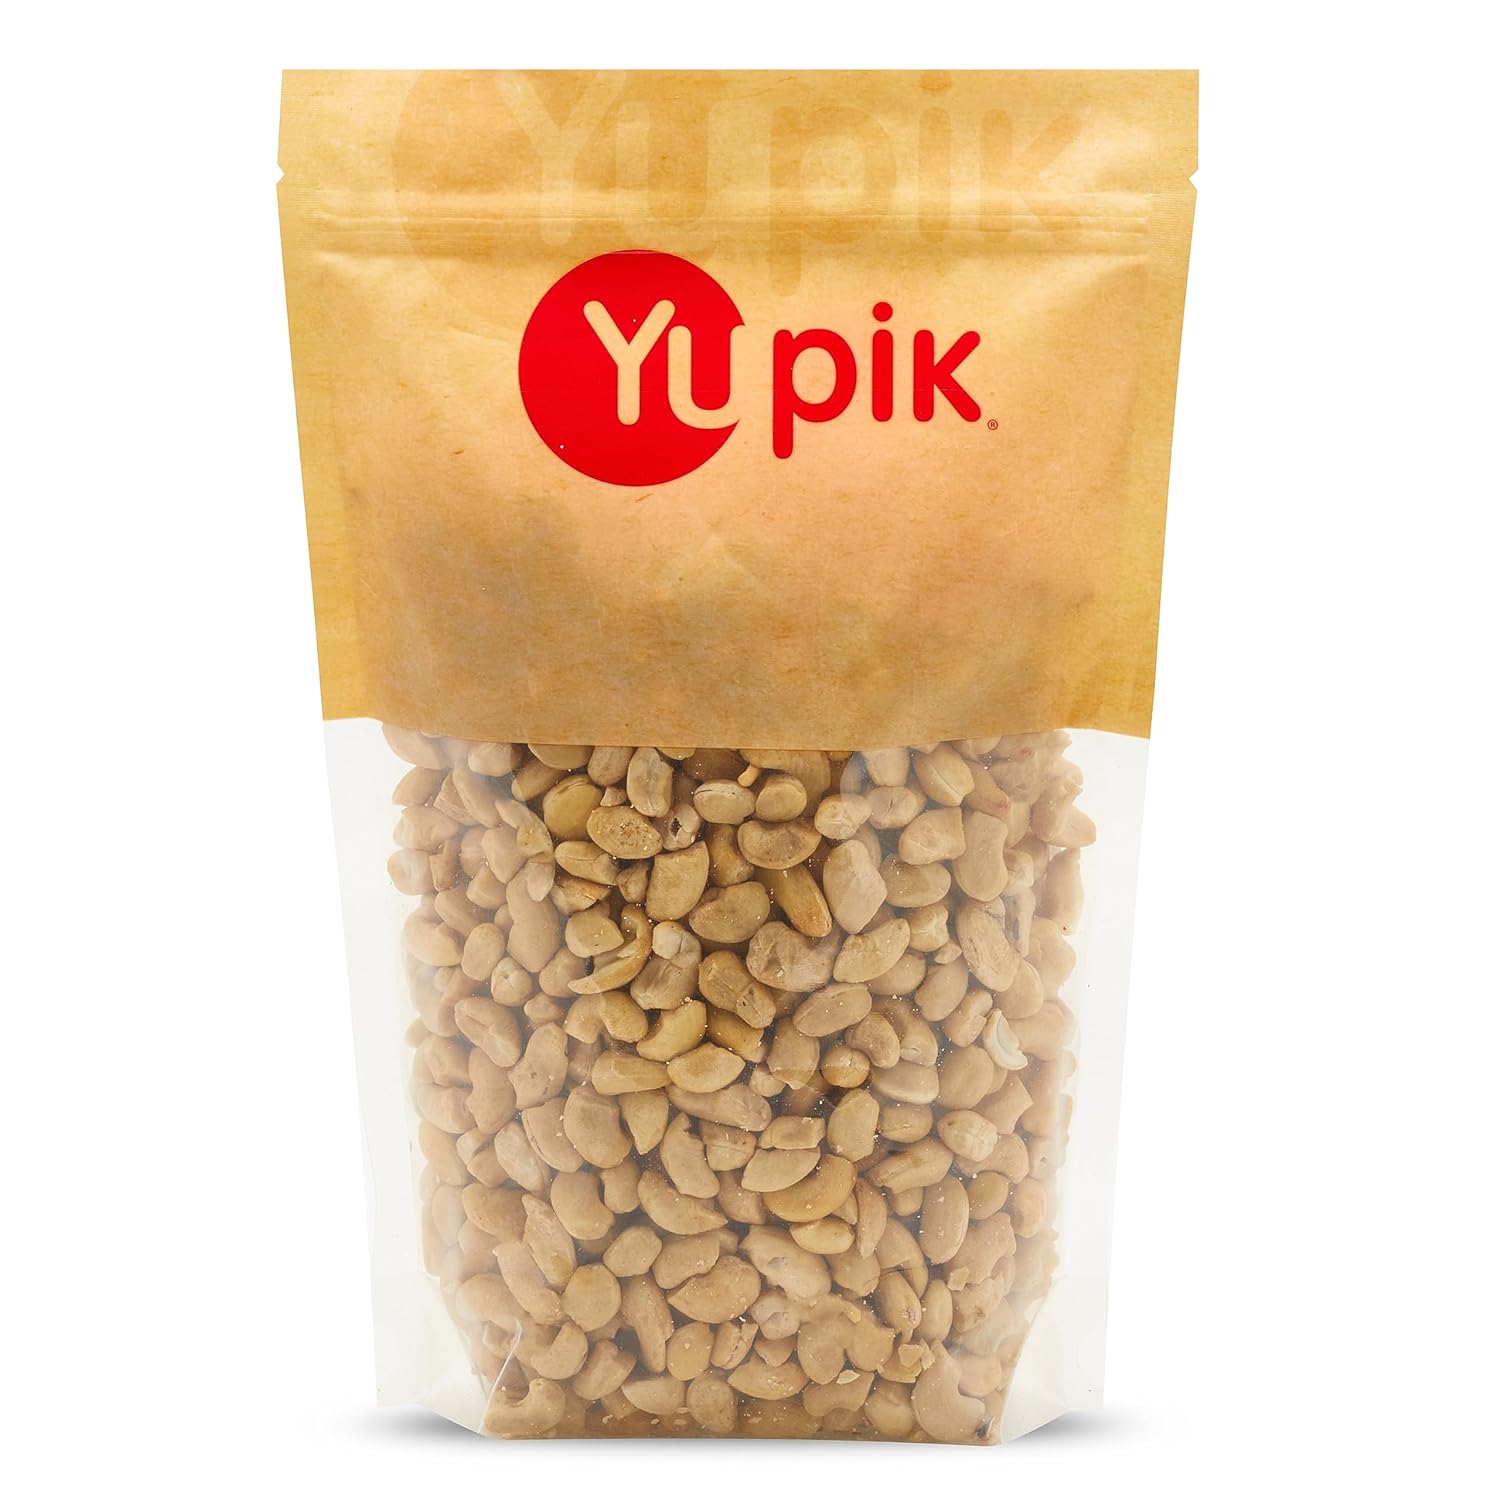 Yupik Nuts Unsalted Roasted Cashew Butts, 2.2 lb, Pack of 1